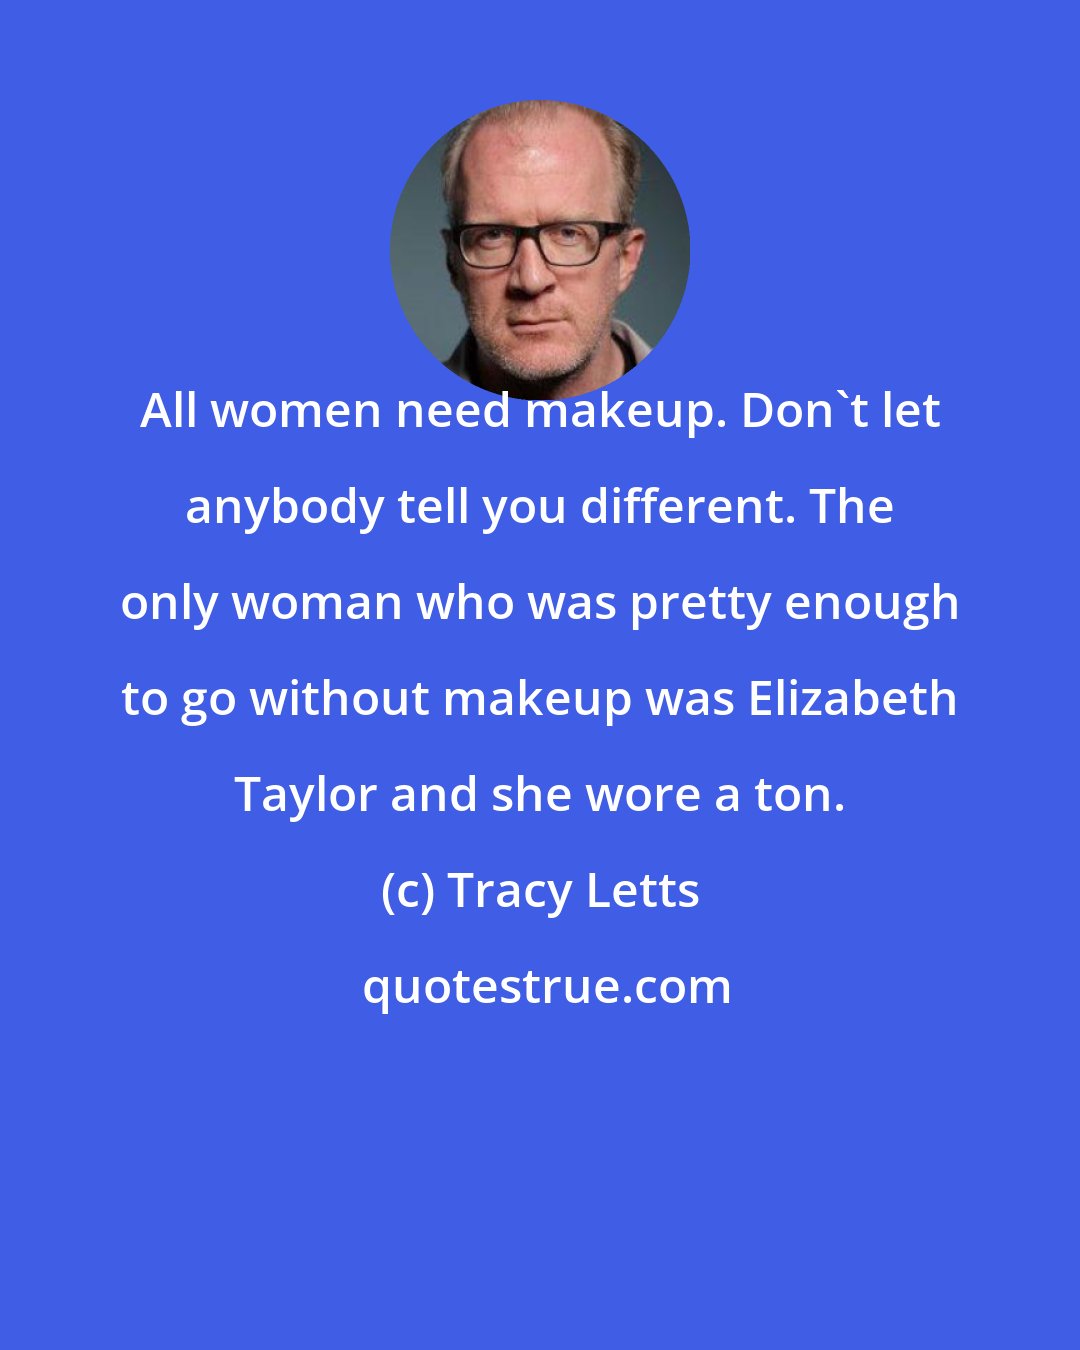 Tracy Letts: All women need makeup. Don't let anybody tell you different. The only woman who was pretty enough to go without makeup was Elizabeth Taylor and she wore a ton.